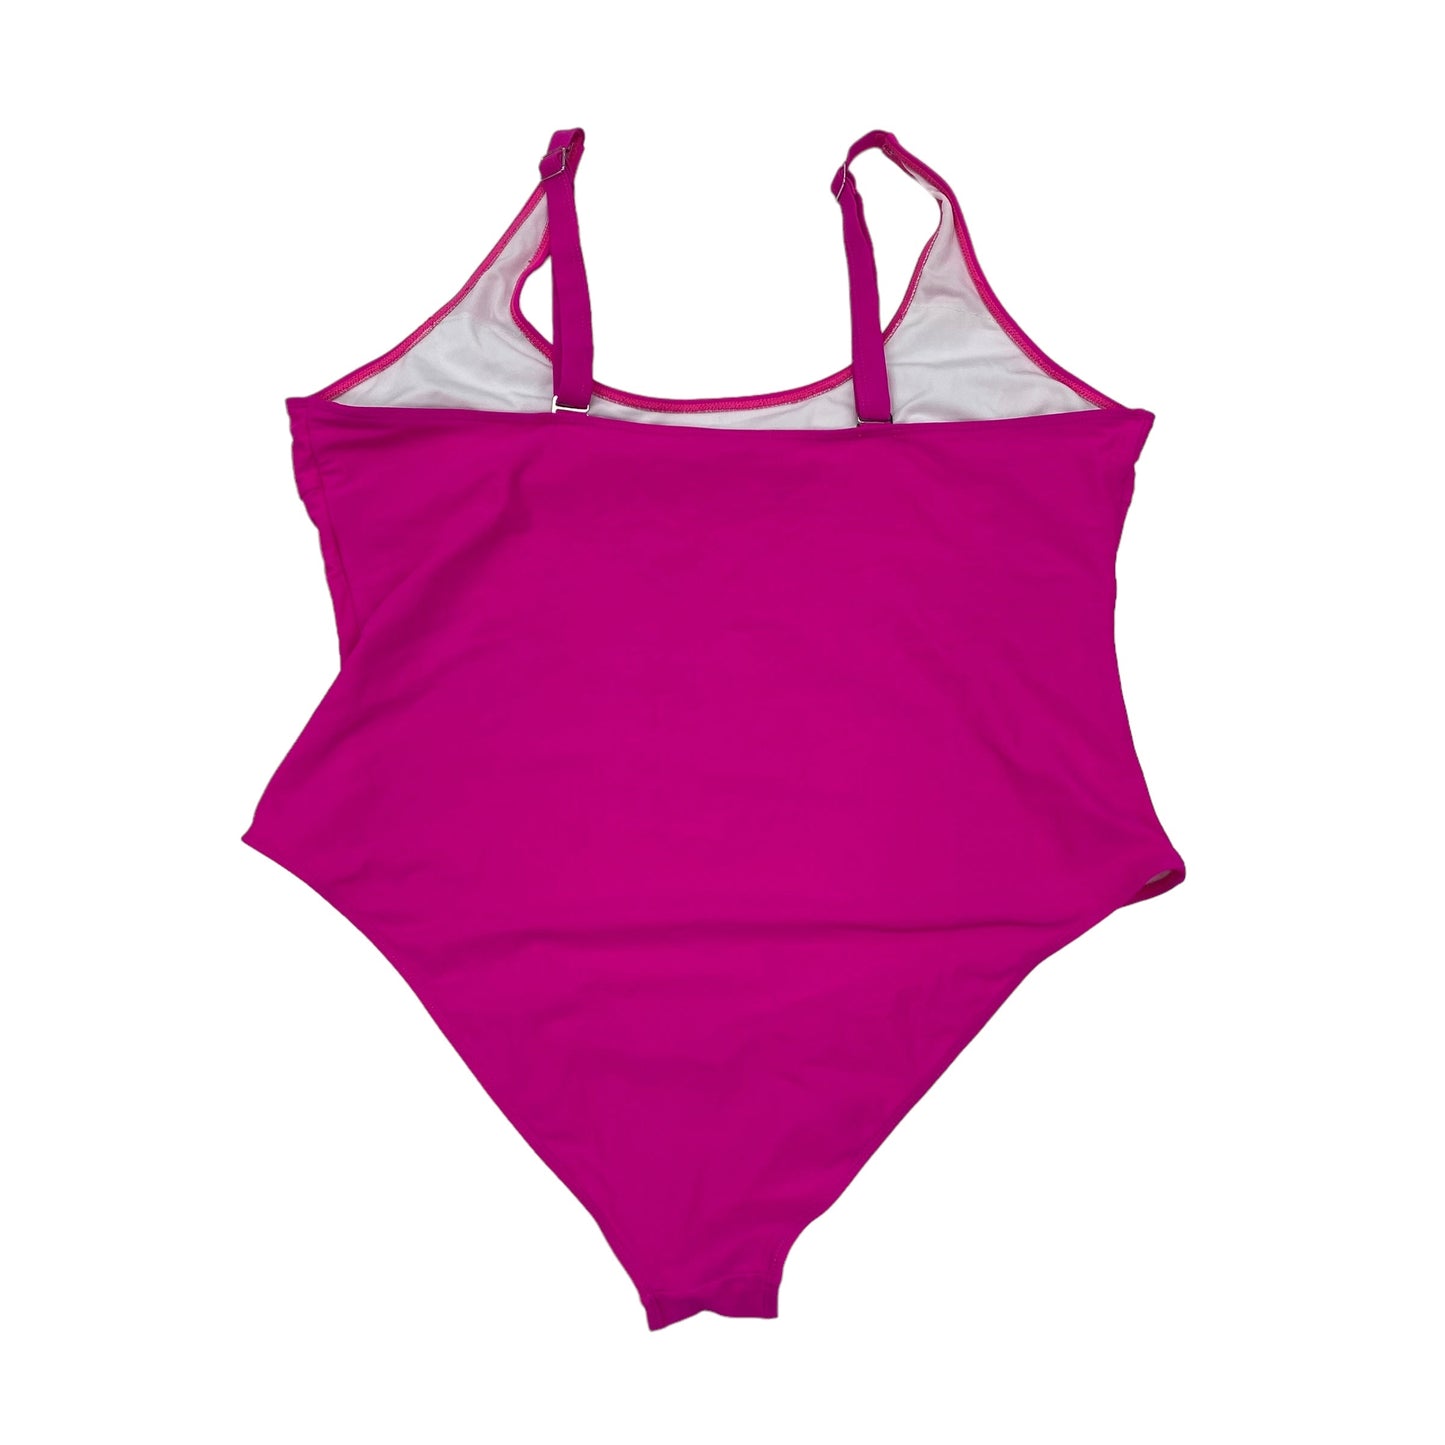 PINK SHEIN SWIMSUIT, Size 4X